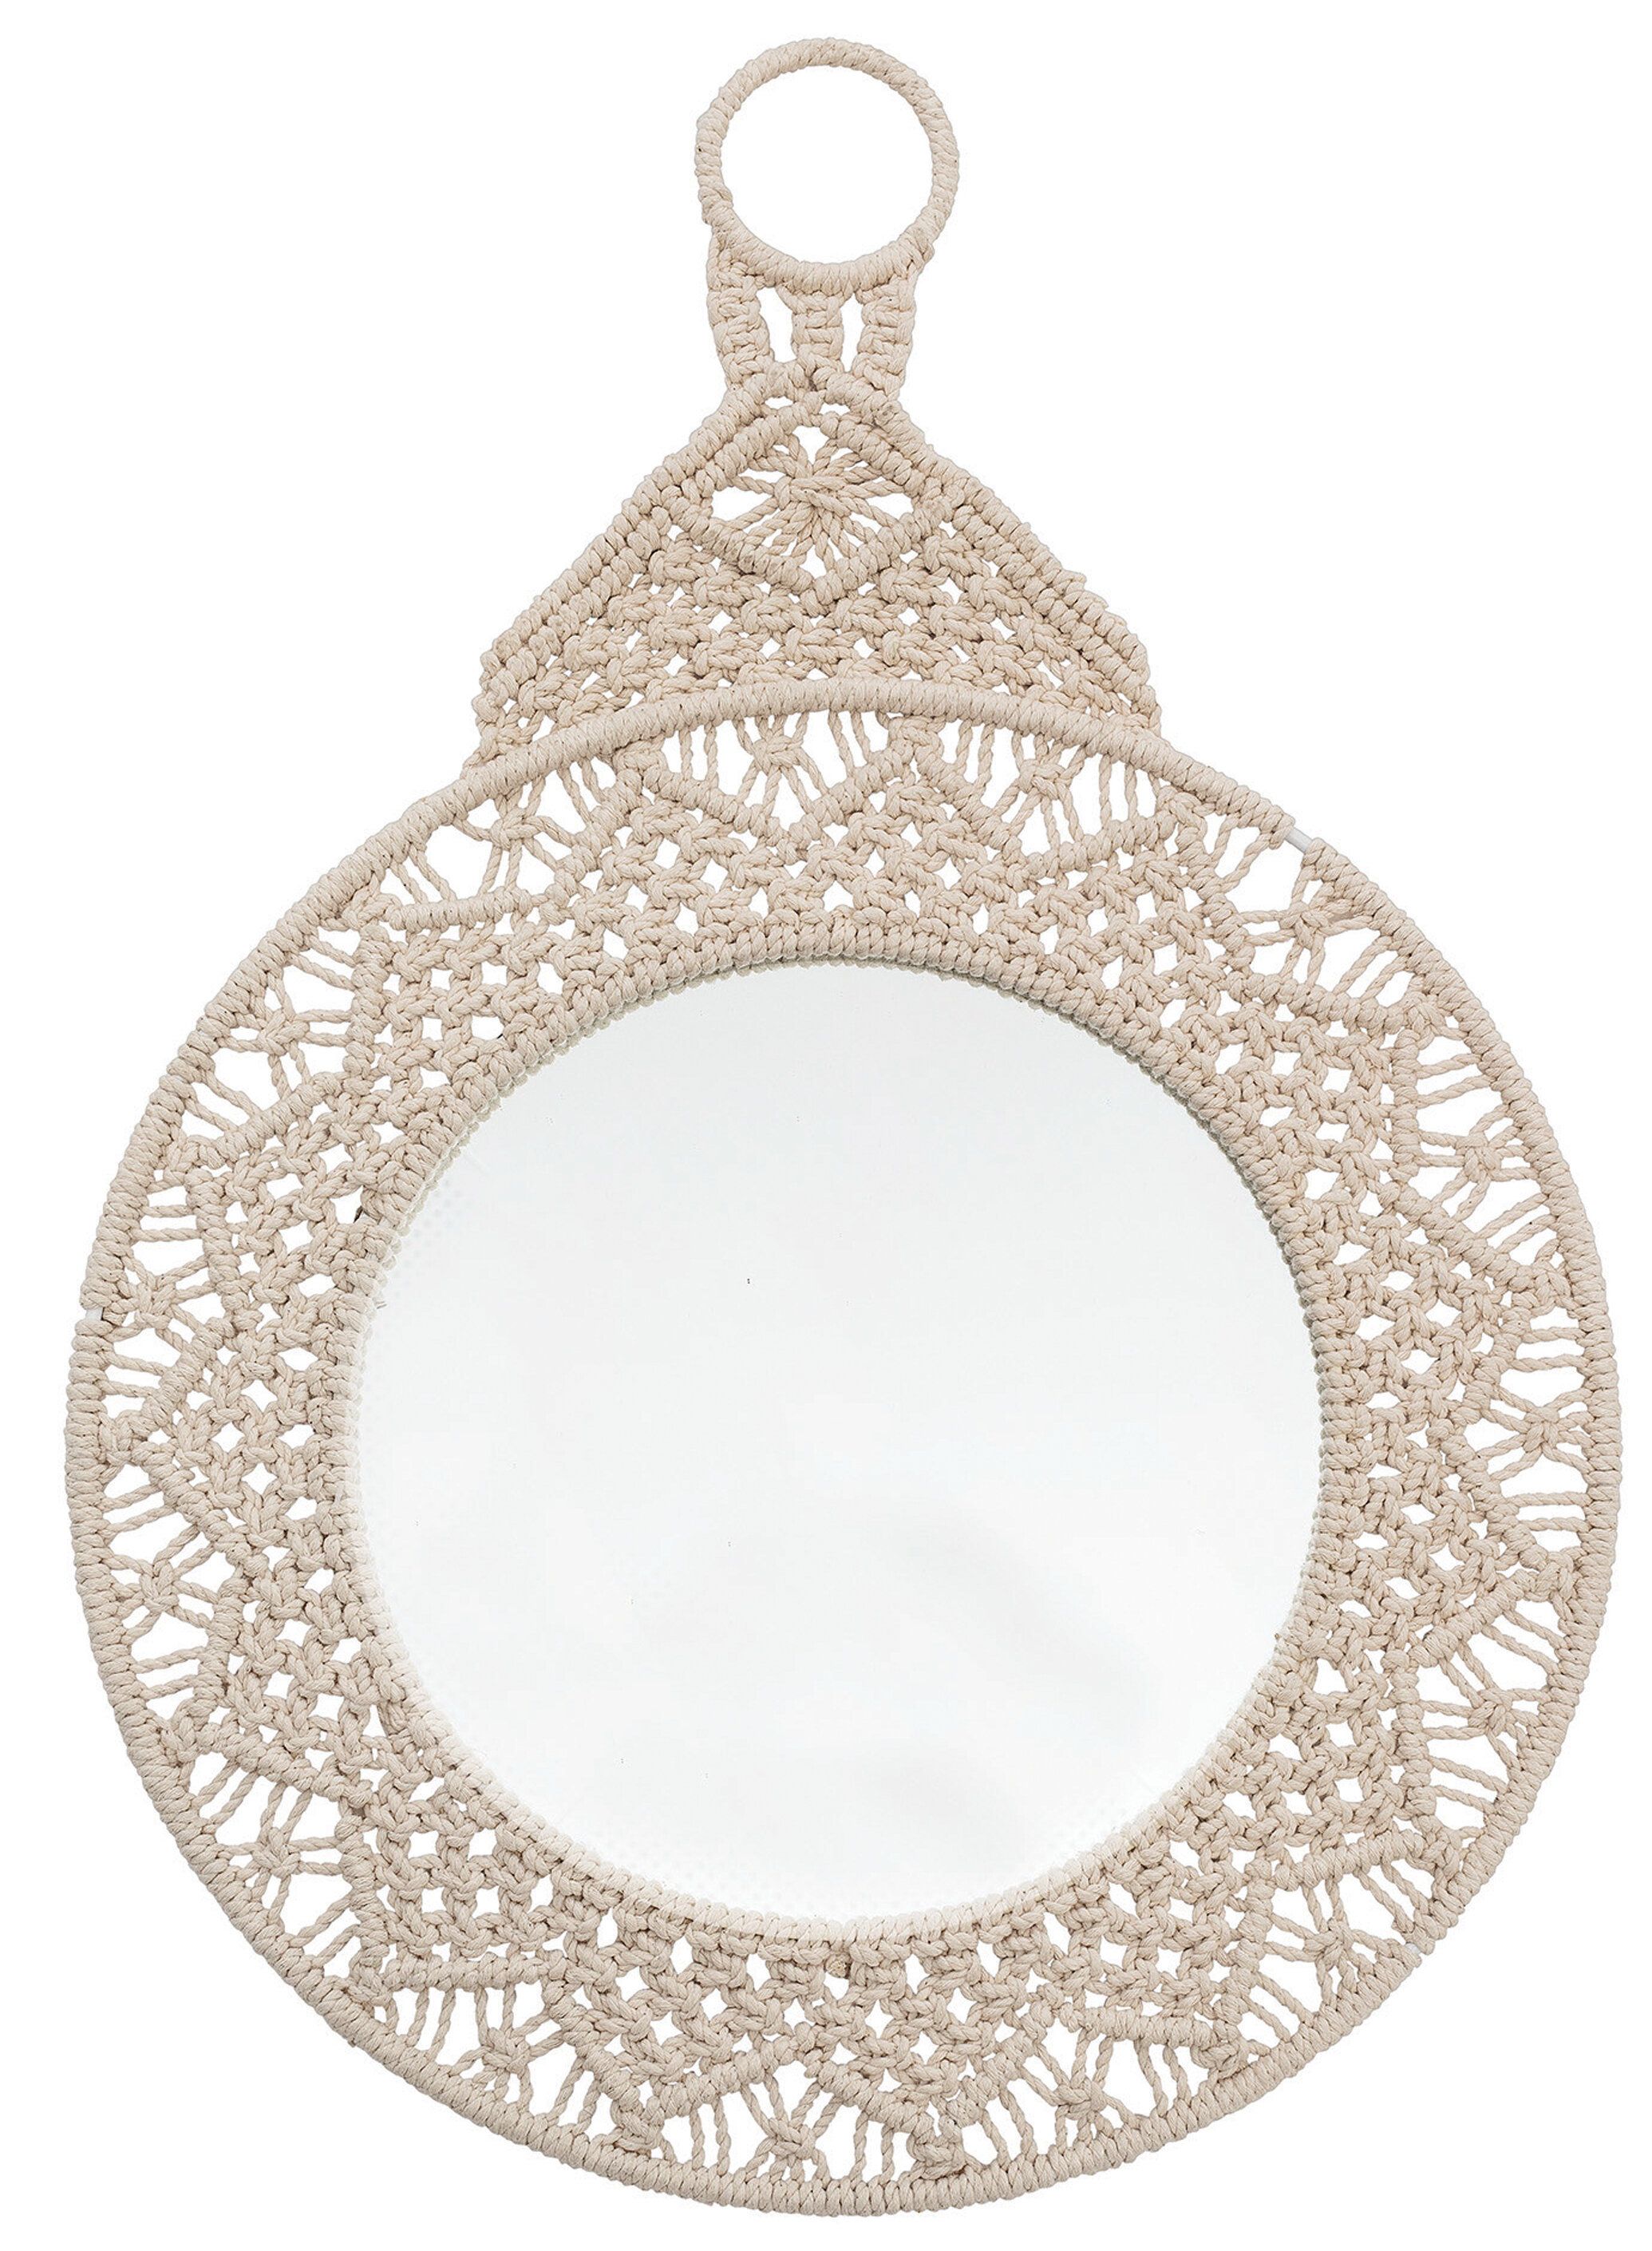 Crewellwalk Eclectic Accent Mirror For Round Eclectic Accent Mirrors (View 13 of 20)